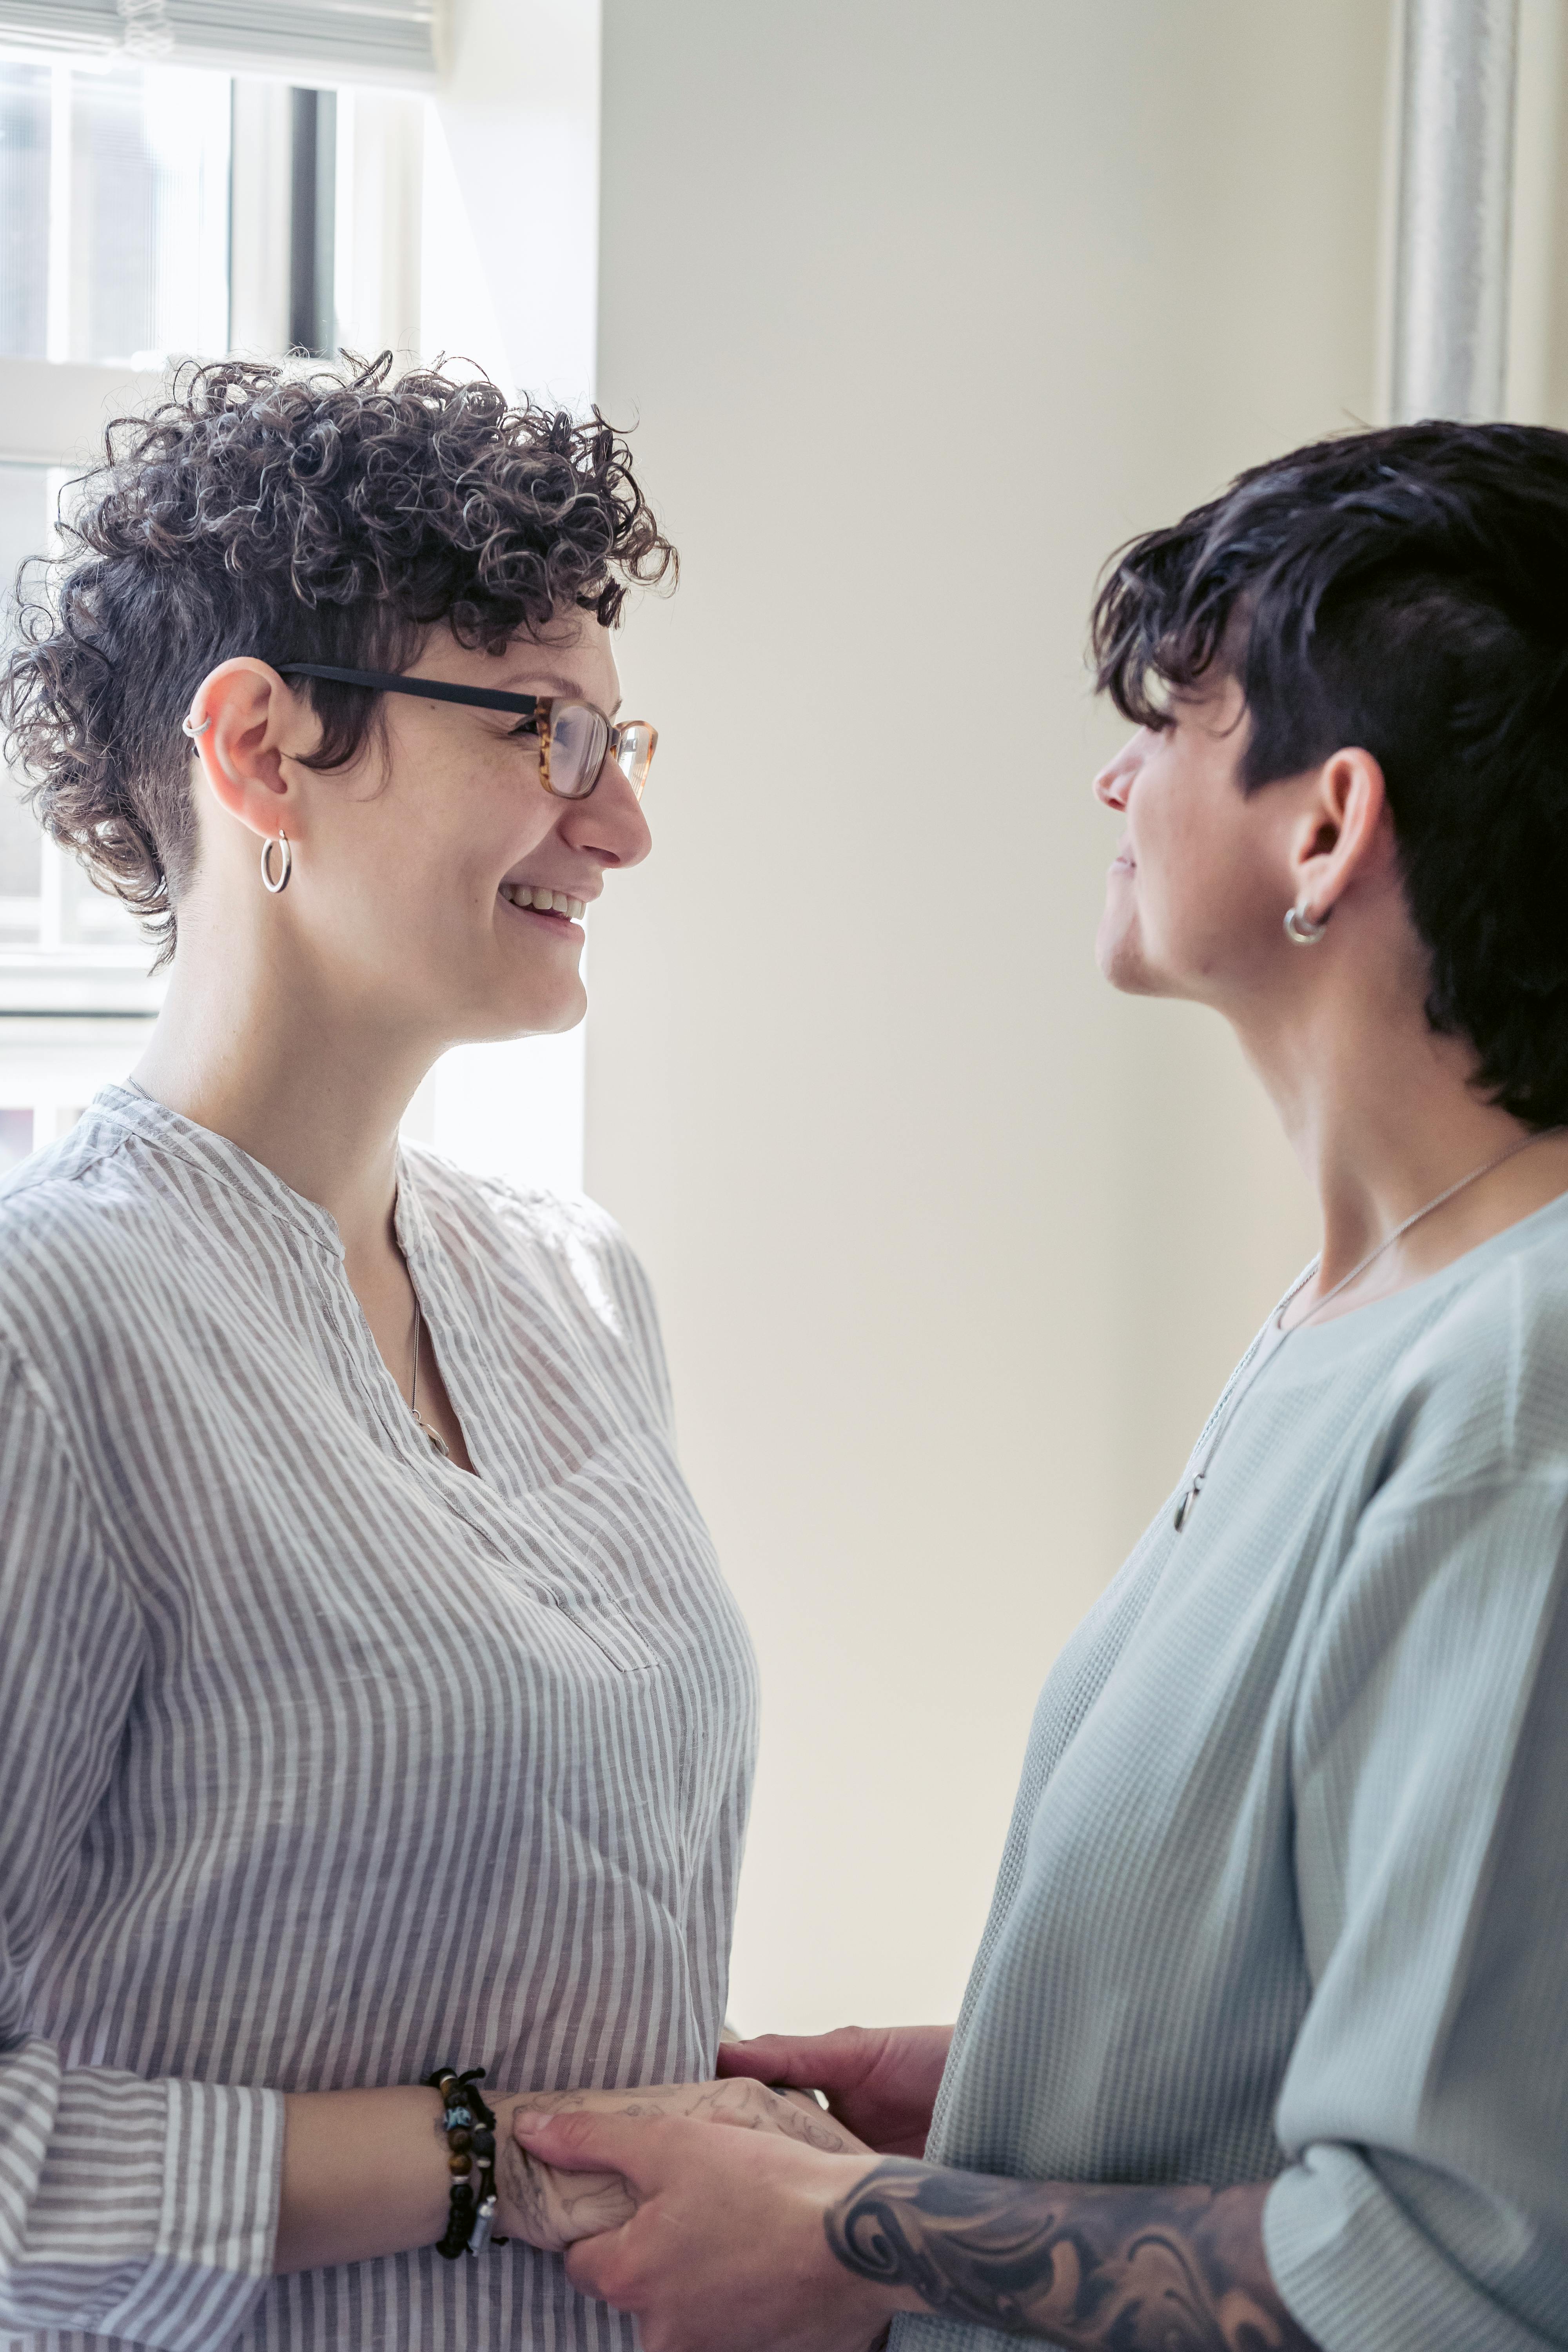 crop smiling lesbian couple talking at home